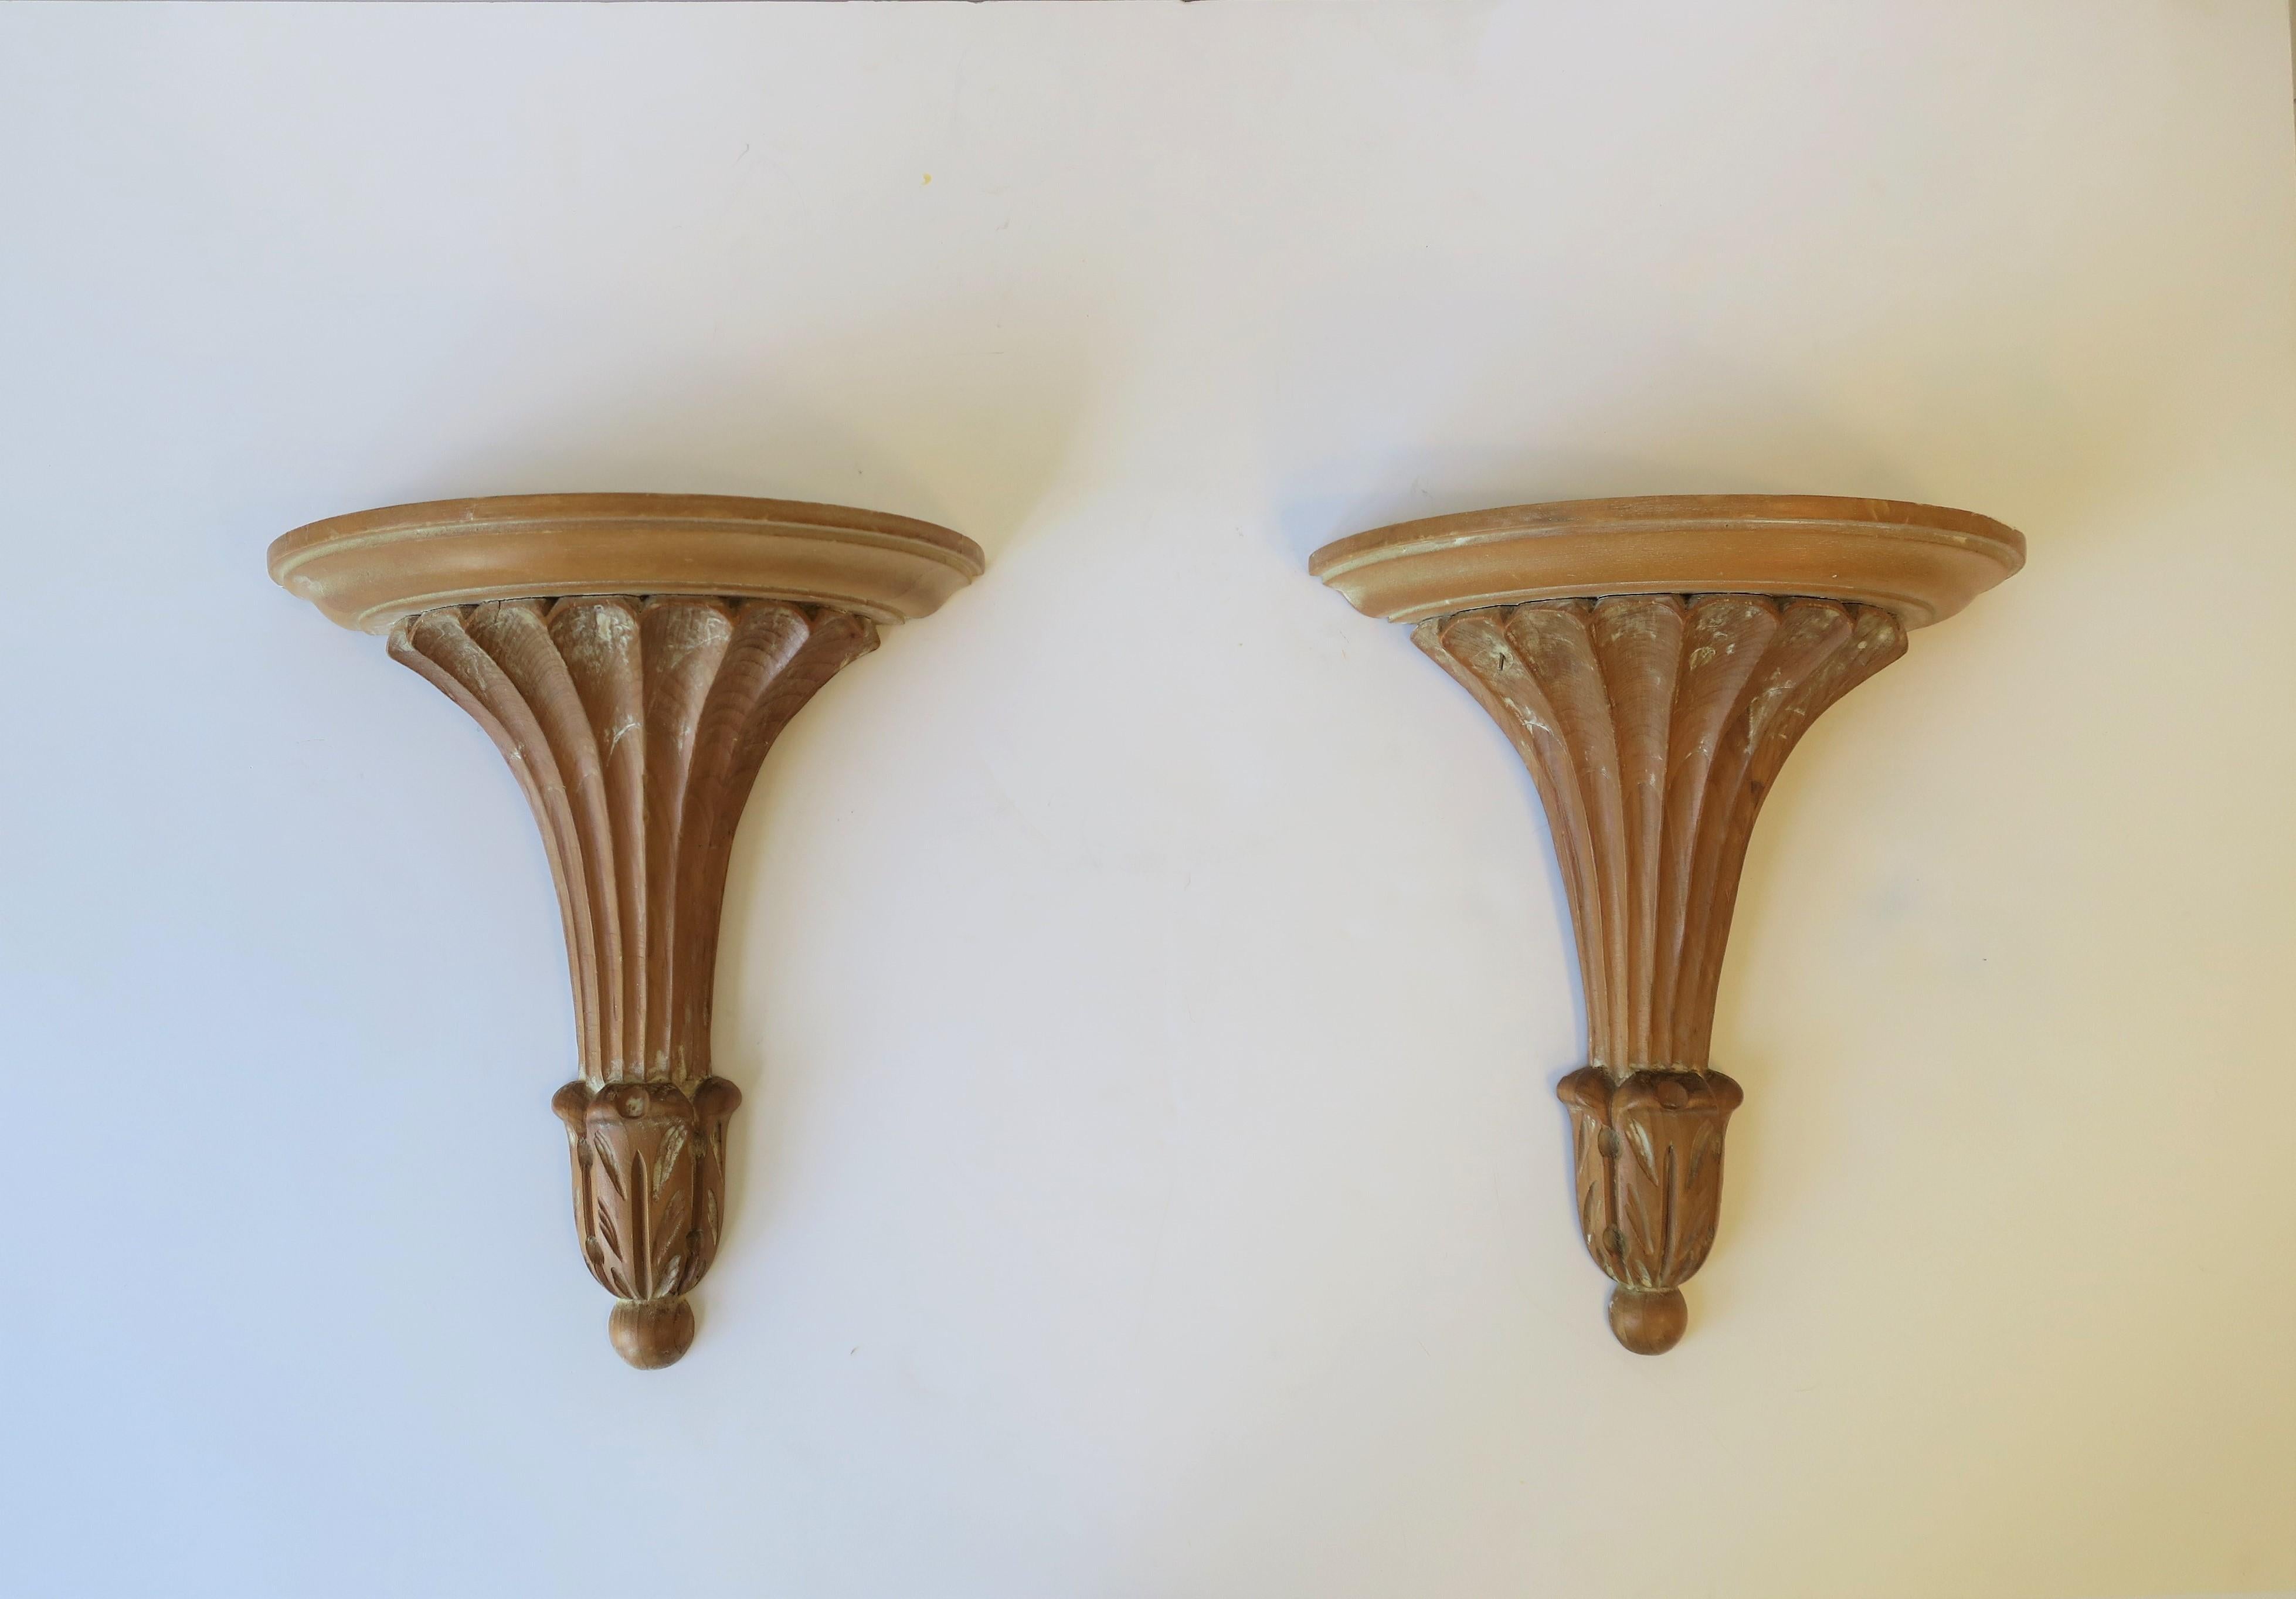 A beautiful pair of Italian natural wood wall shelves or brackets with a pillar column design in the Neoclassical style, circa mid-late 20th century, Italy. Pair are marked on back as show in images #9, 10 and 11. 

Wall brackets/shelves measure: 5